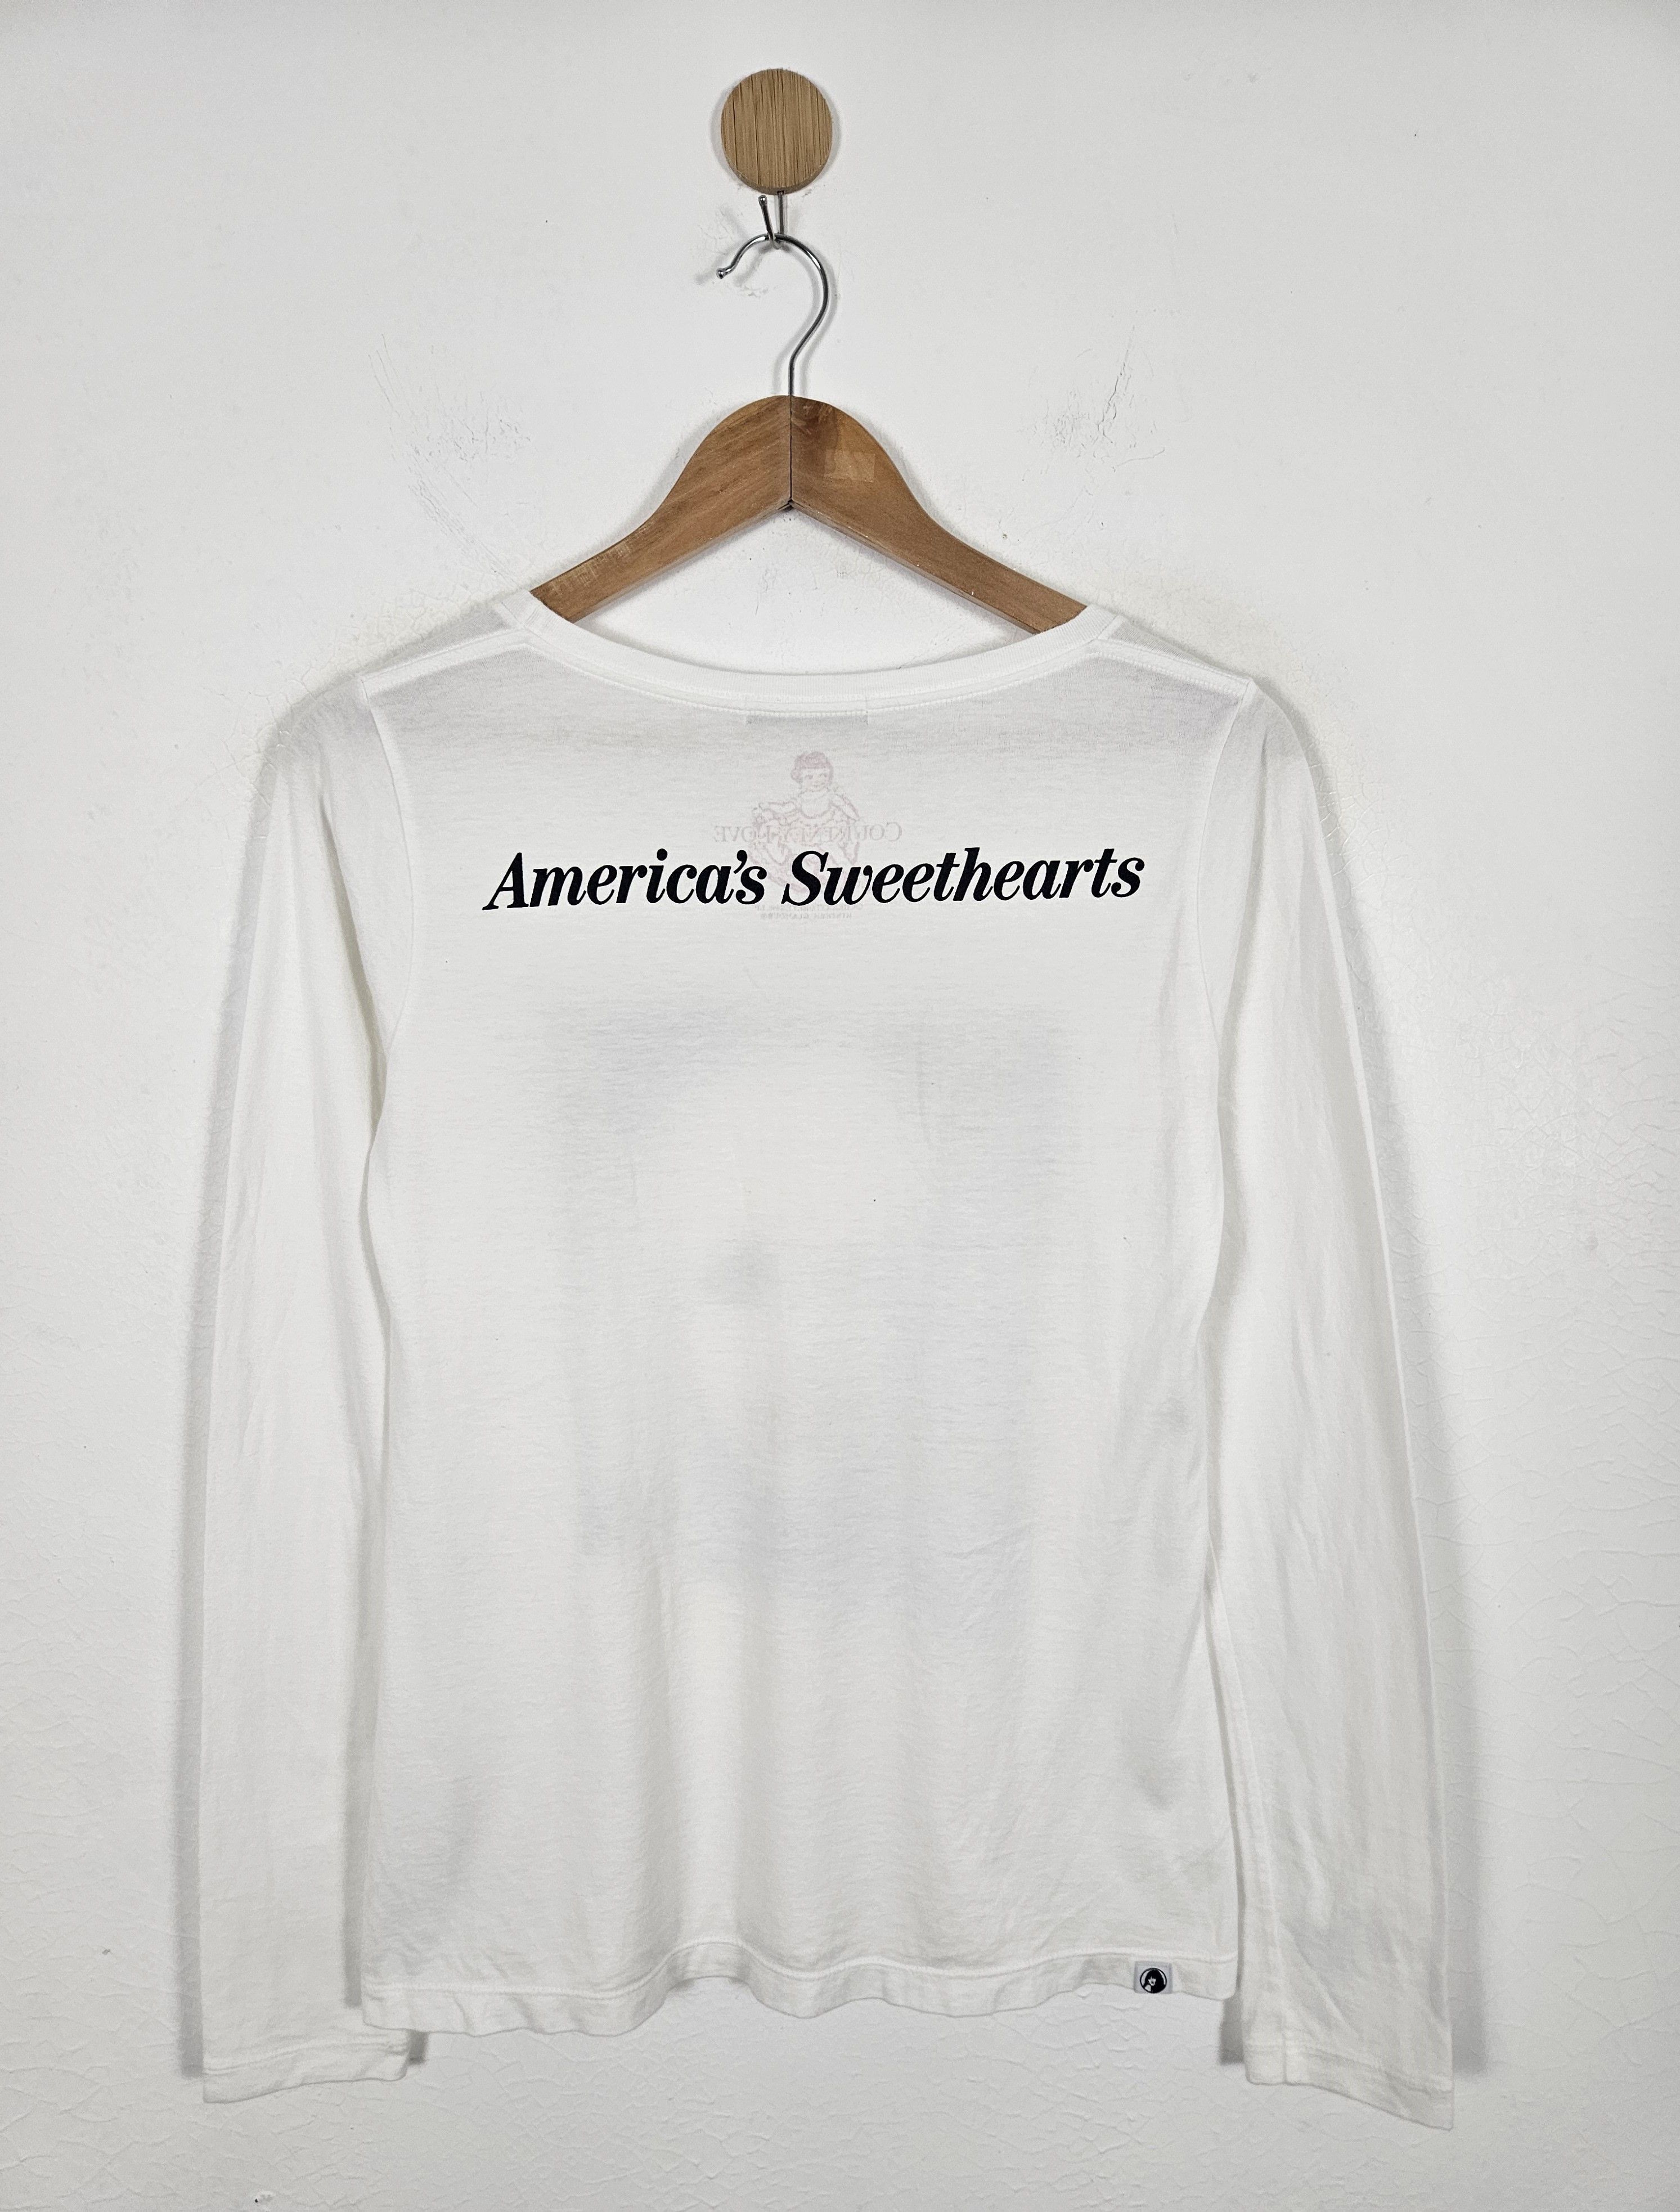 Hysteric Glamour Courtney Love Hole American Sweetheart tee - 2